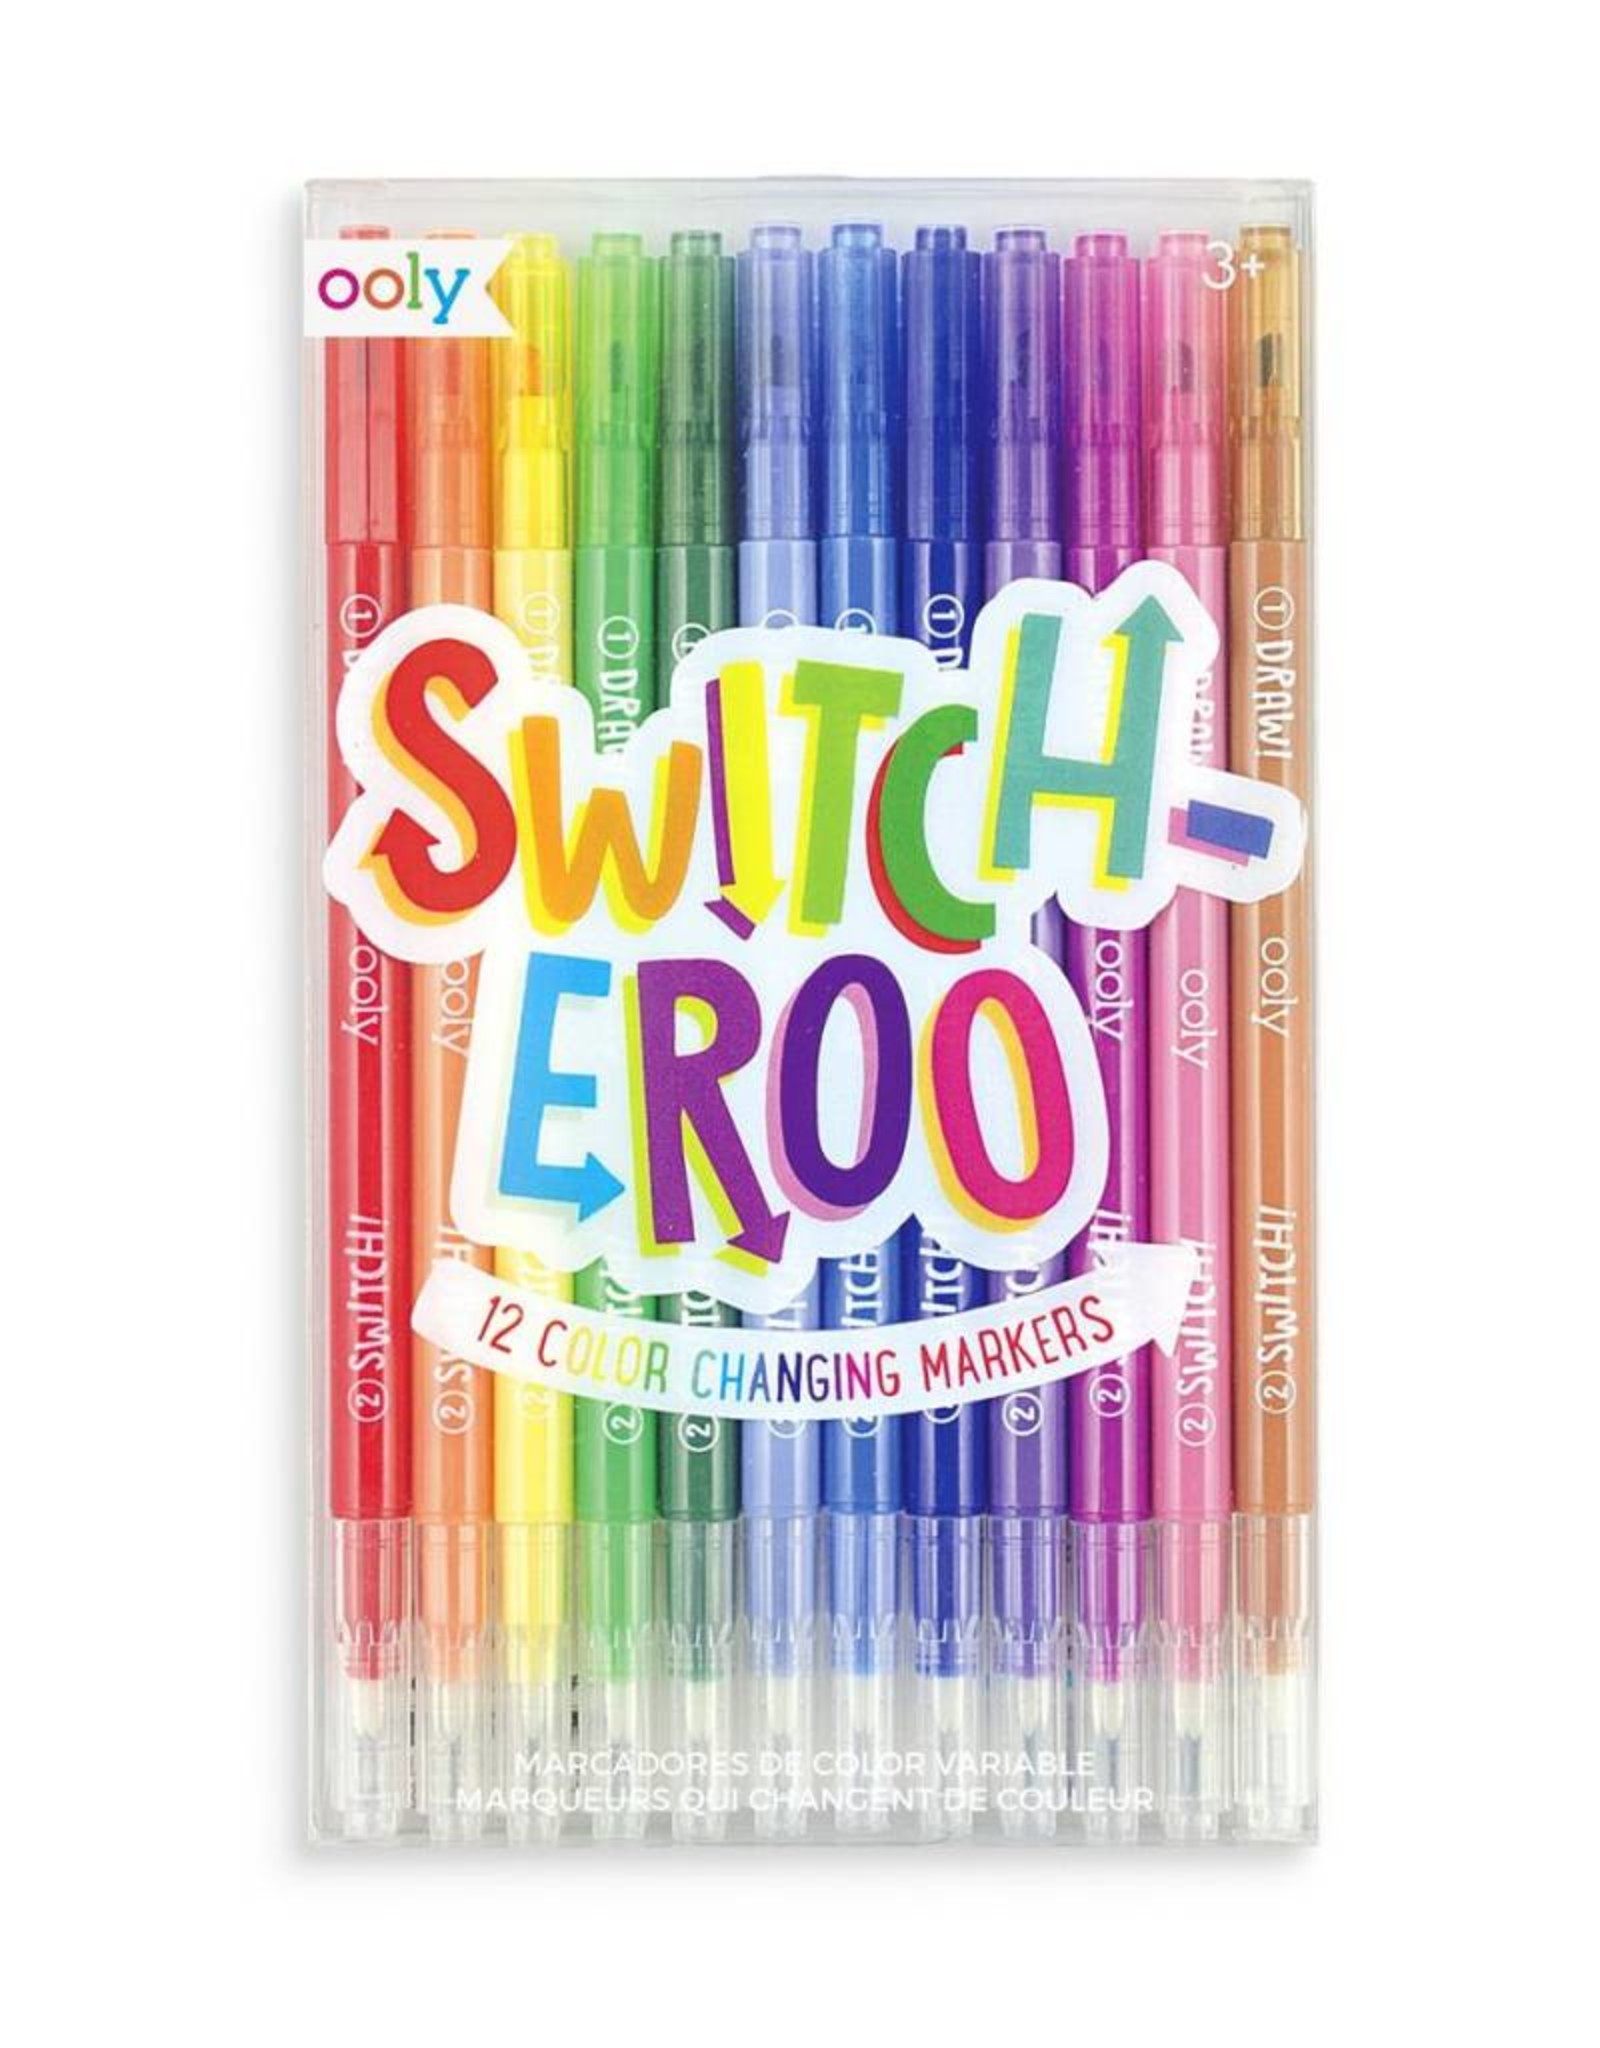 switch-eroo color changing markers - The Little Things